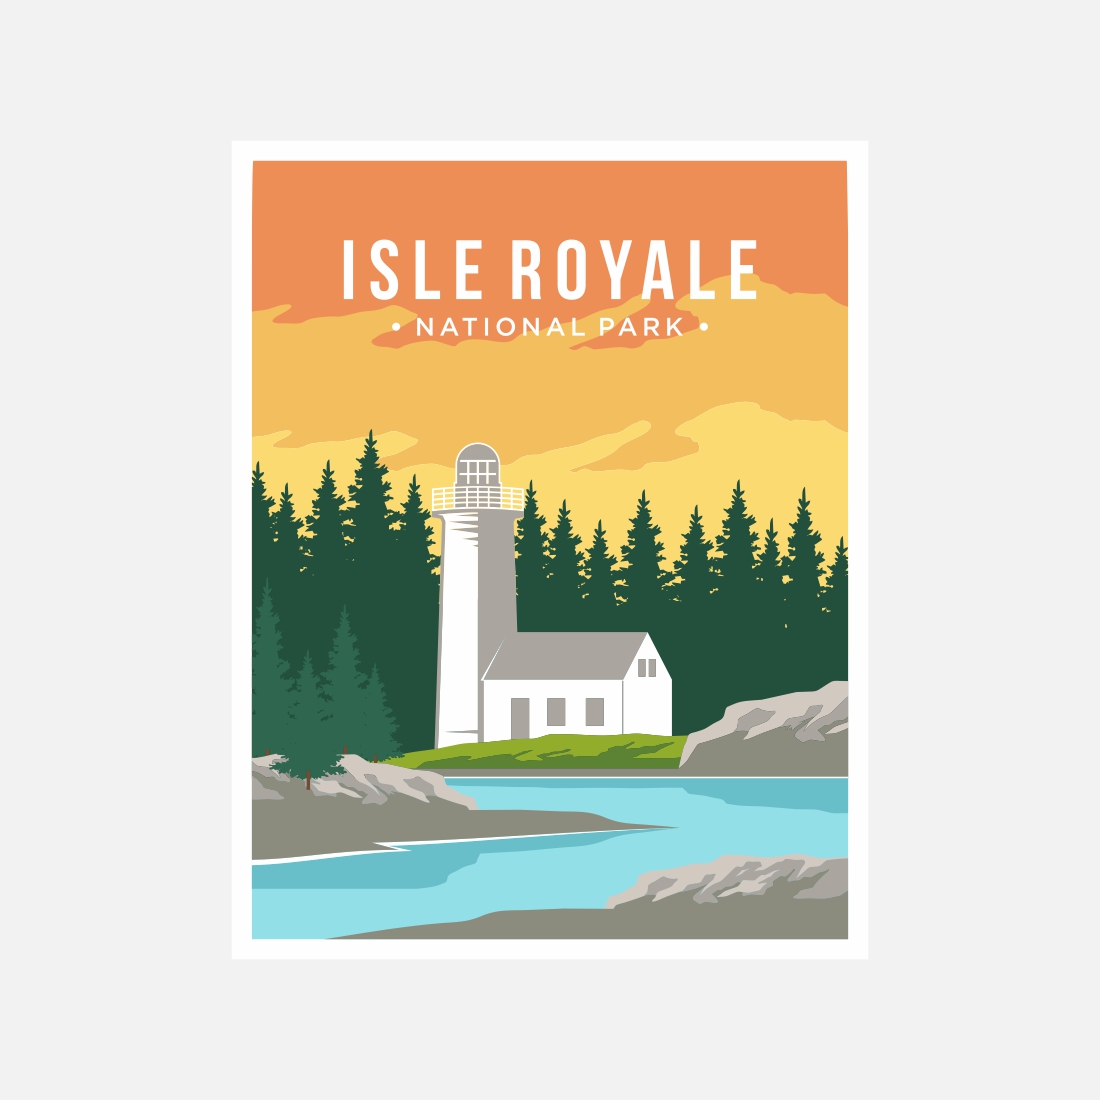 Isle Royale national park poster vector illustration design – Only $8 cover image.